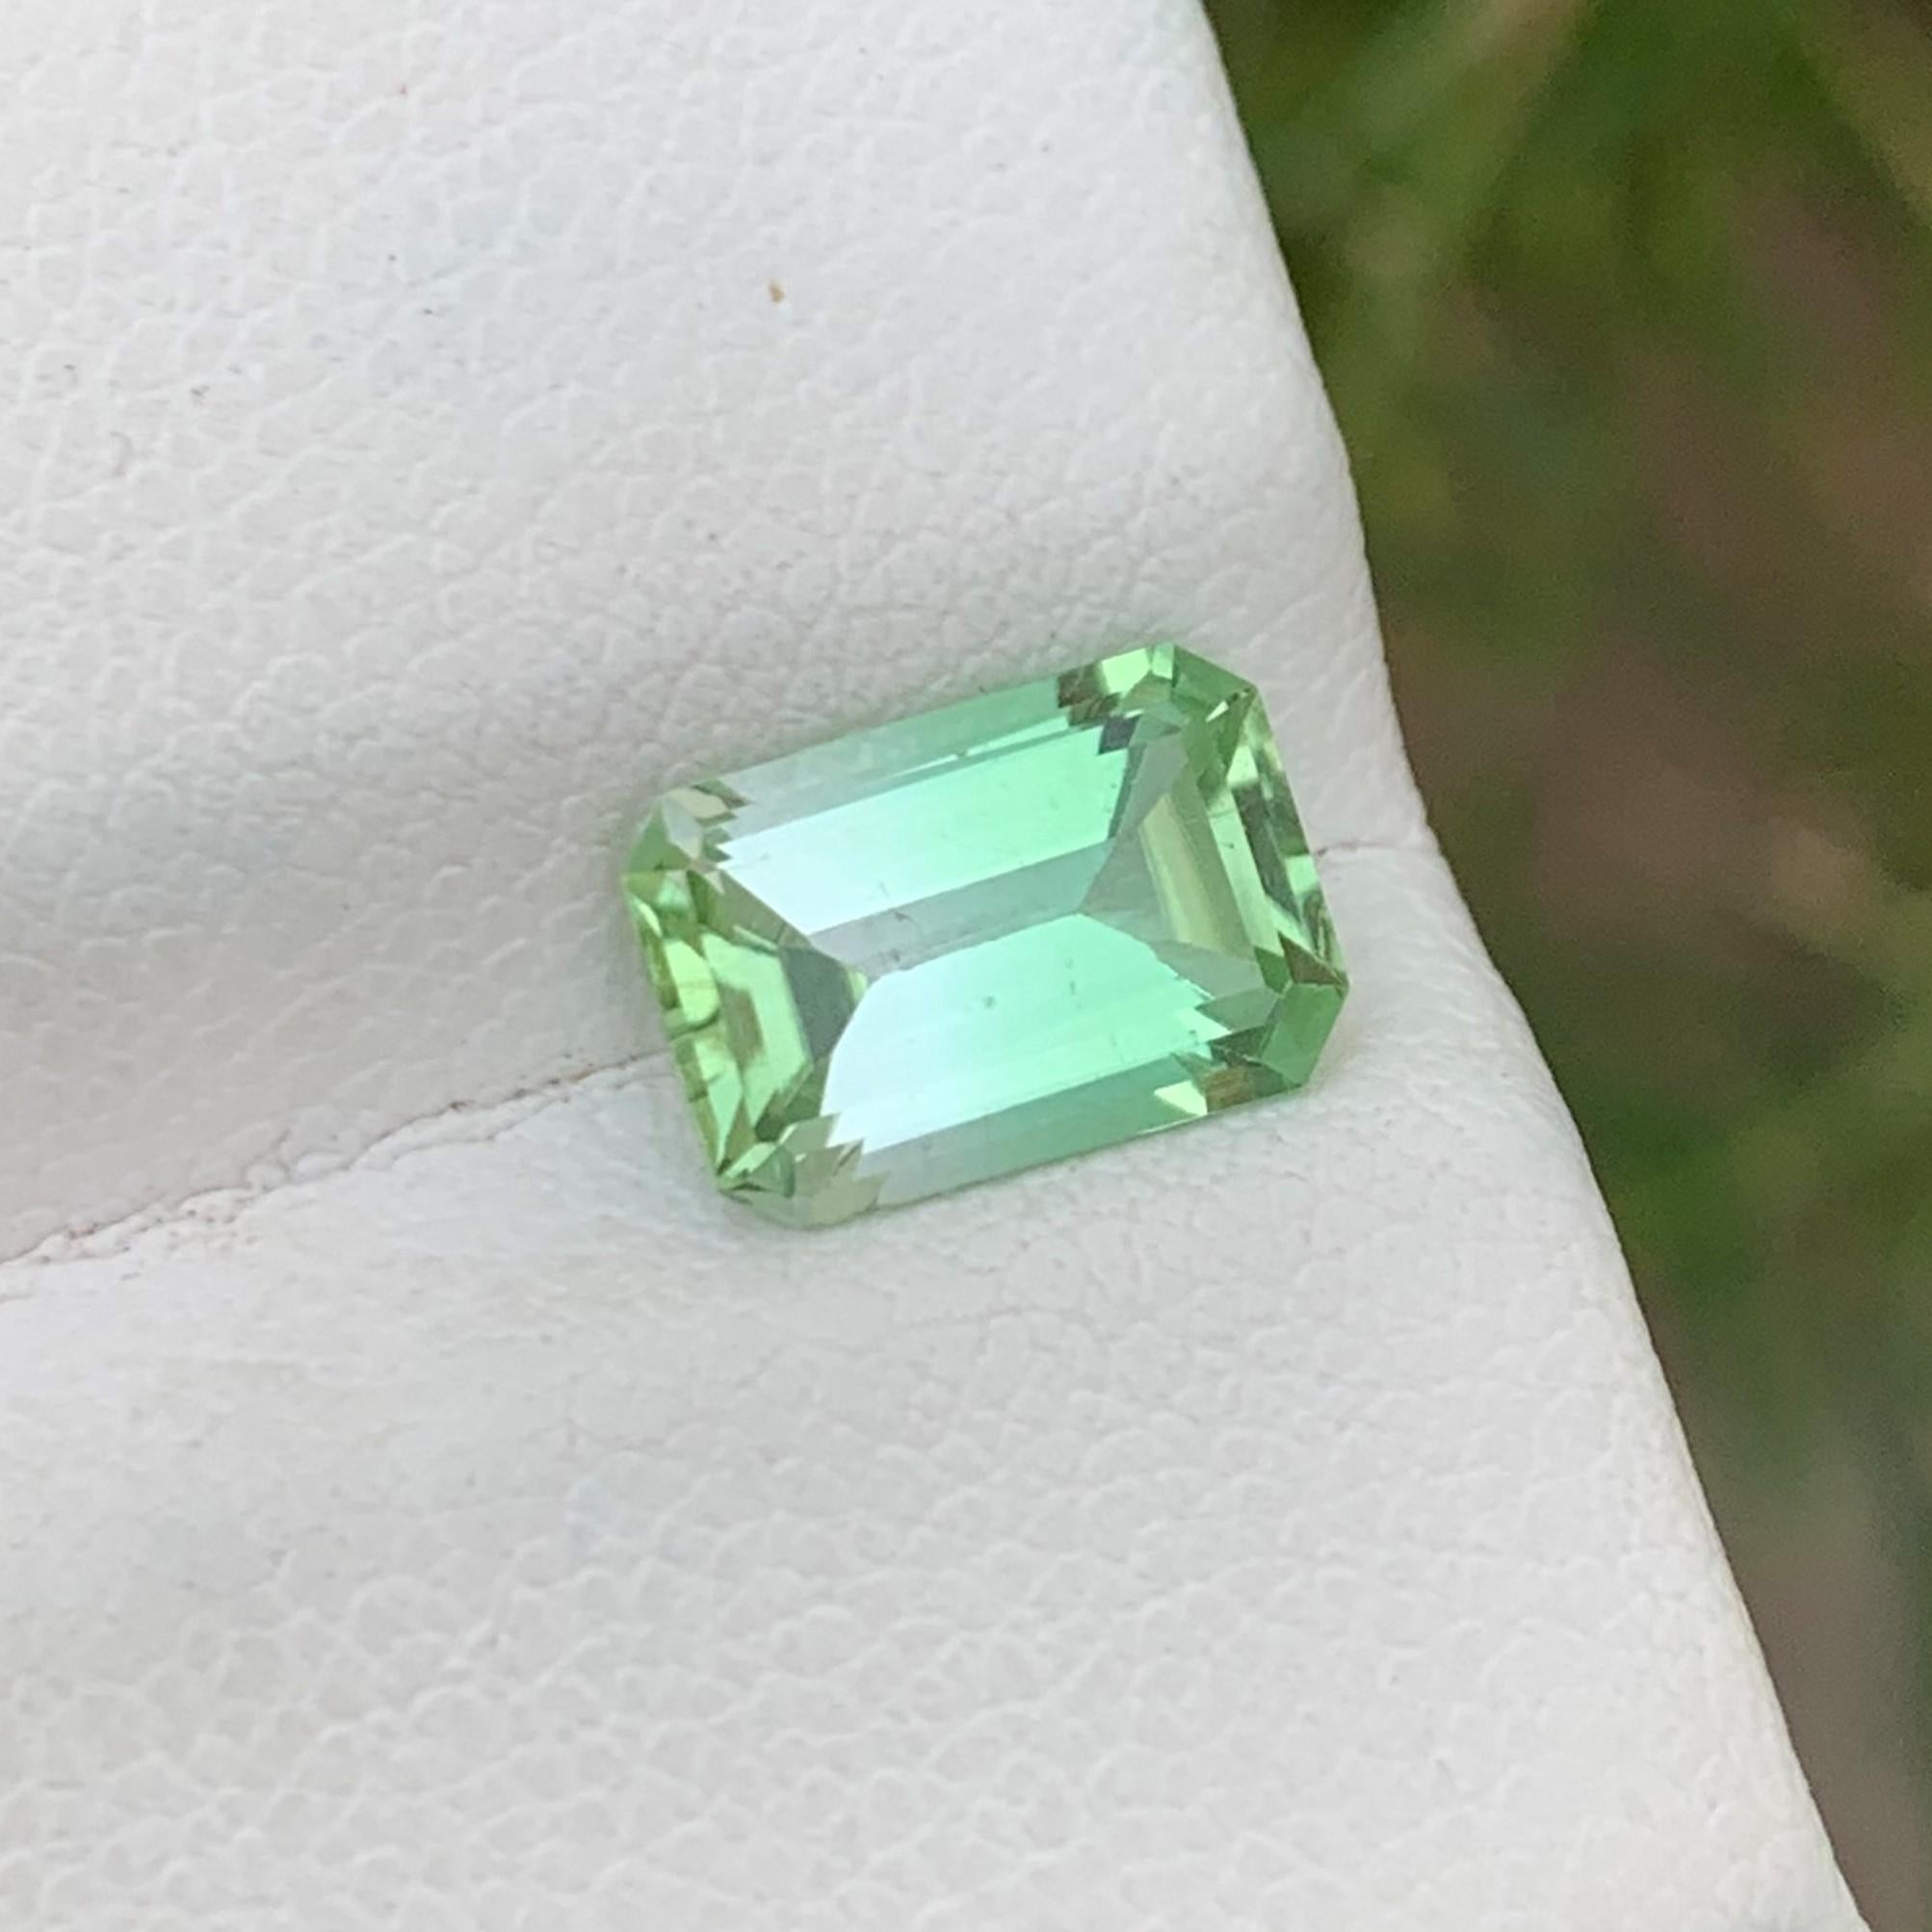 Gemstone Type : Tourmaline
Weight : 2.0 Carats
Dimensions : 9.2x6.4x4.3 Mm
Origin : Kunar Afghanistan
Clarity : Eye Clean
Shape: Emerald
Color: Mintgreen
Certificate: On Demand
Basically, mint tourmalines are tourmalines with pastel hues of light